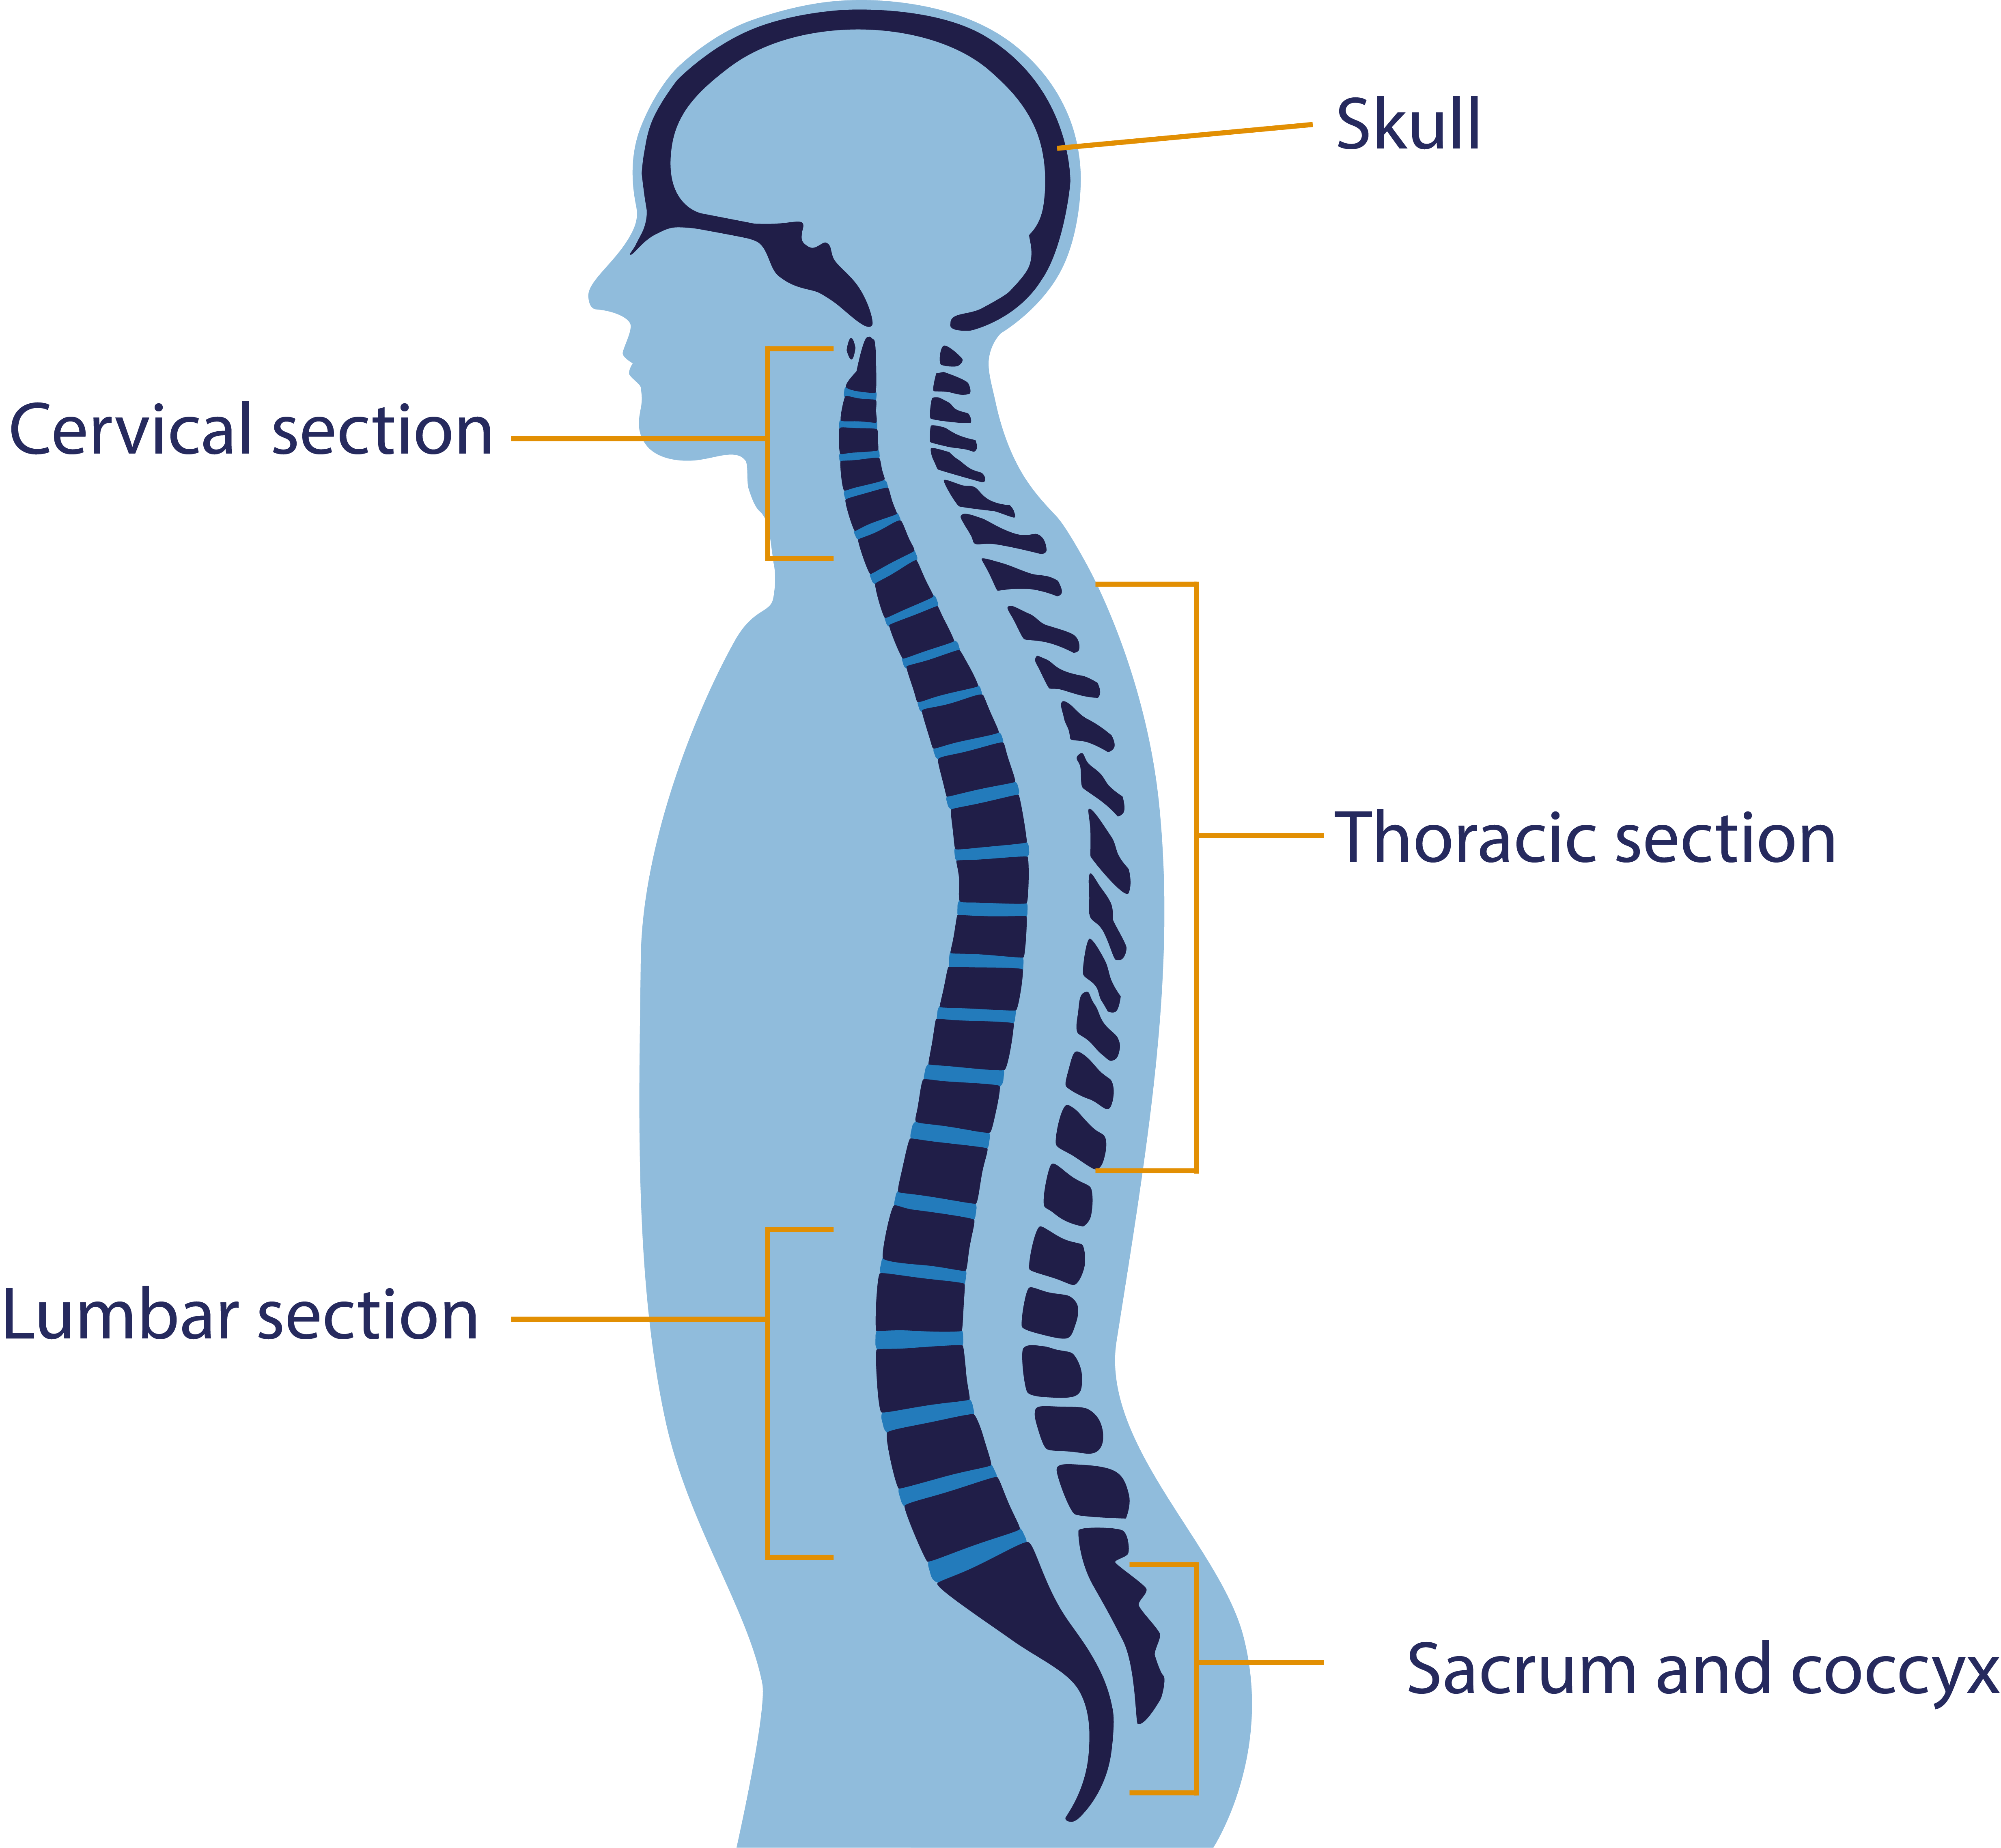 A diagram of the spine including the skull, cervical section, thoracic section, lumbar section and coccyx